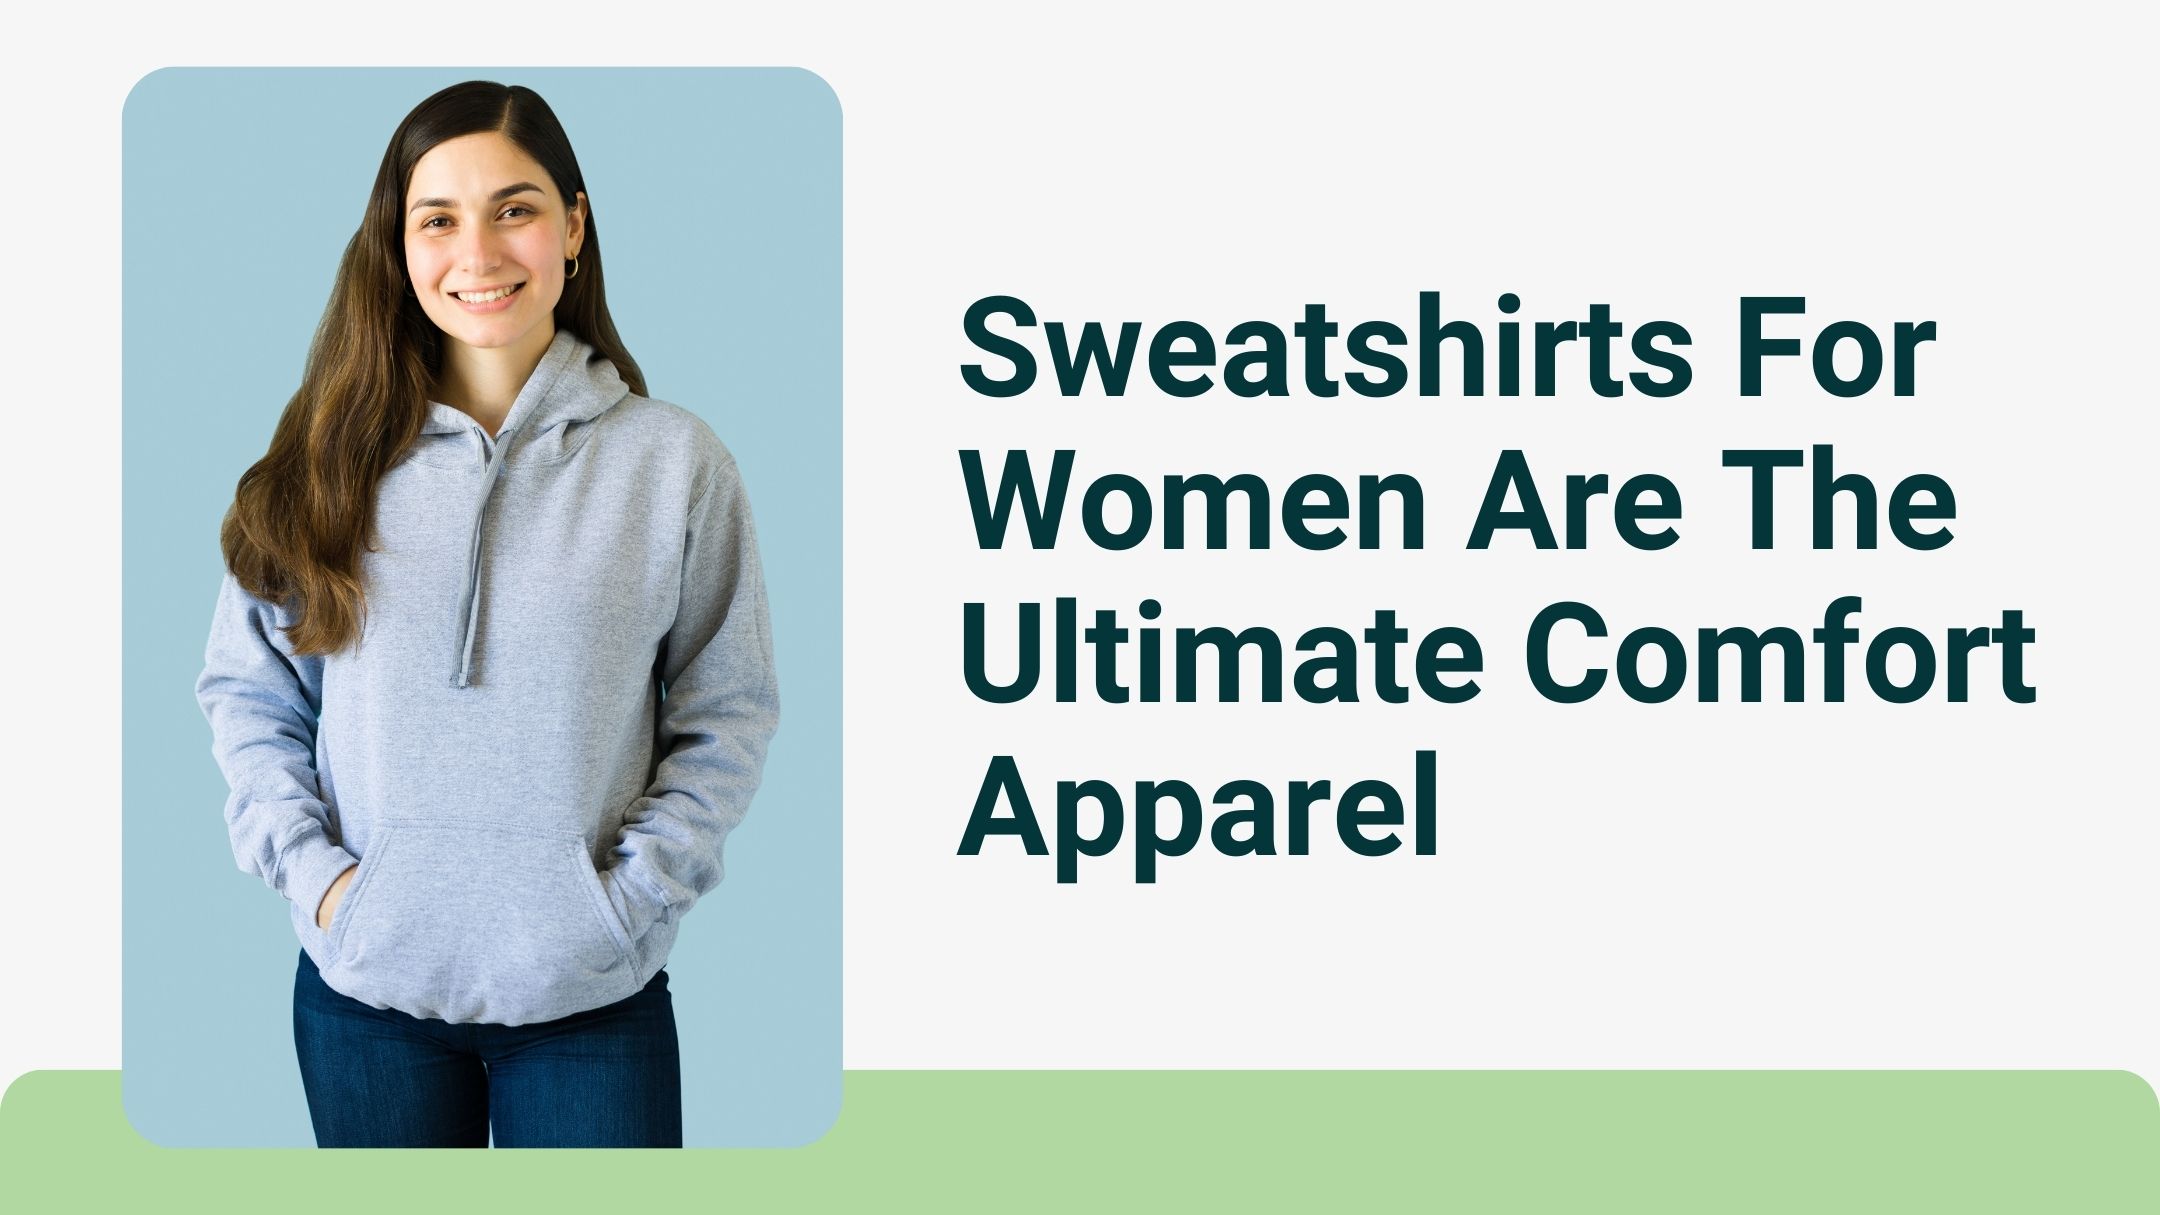 Sweatshirts For Women Are The Ultimate Comfort Apparel